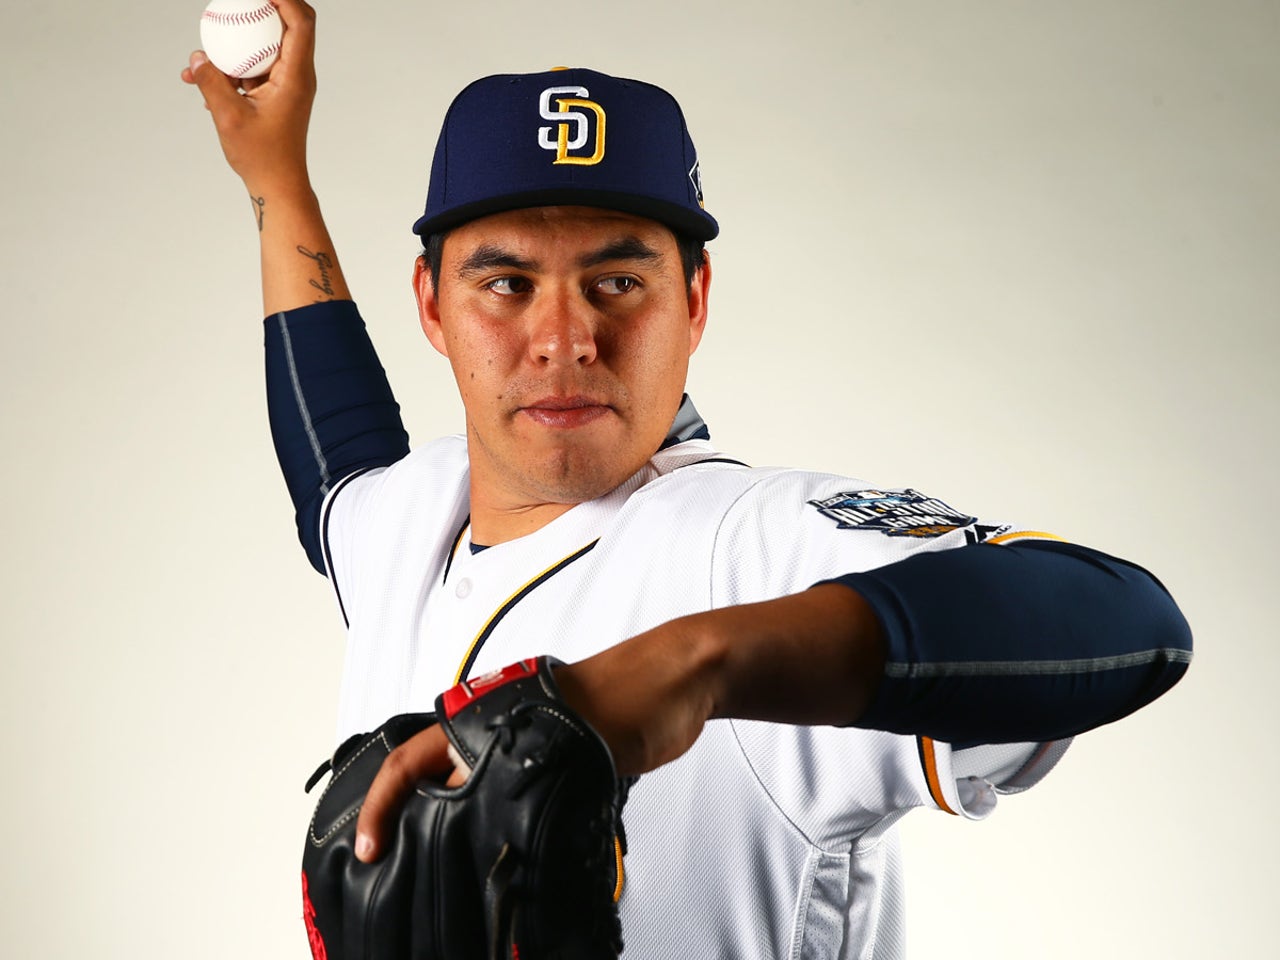 Padres on deck: Back home to face the Cubs - The San Diego Union